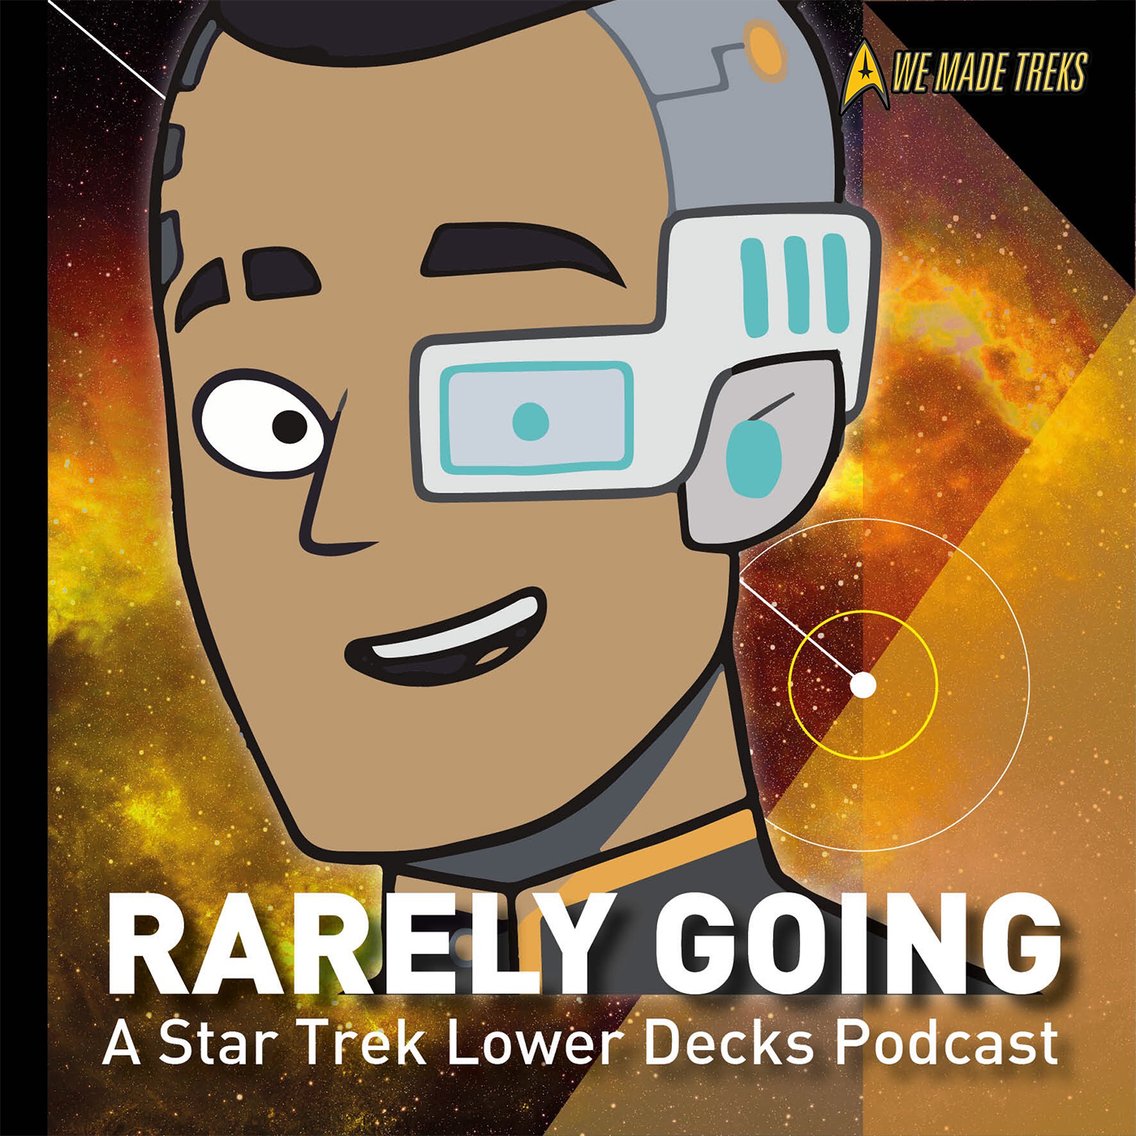 Rarely Going - An Animated Star Trek Podcast - Cover Image